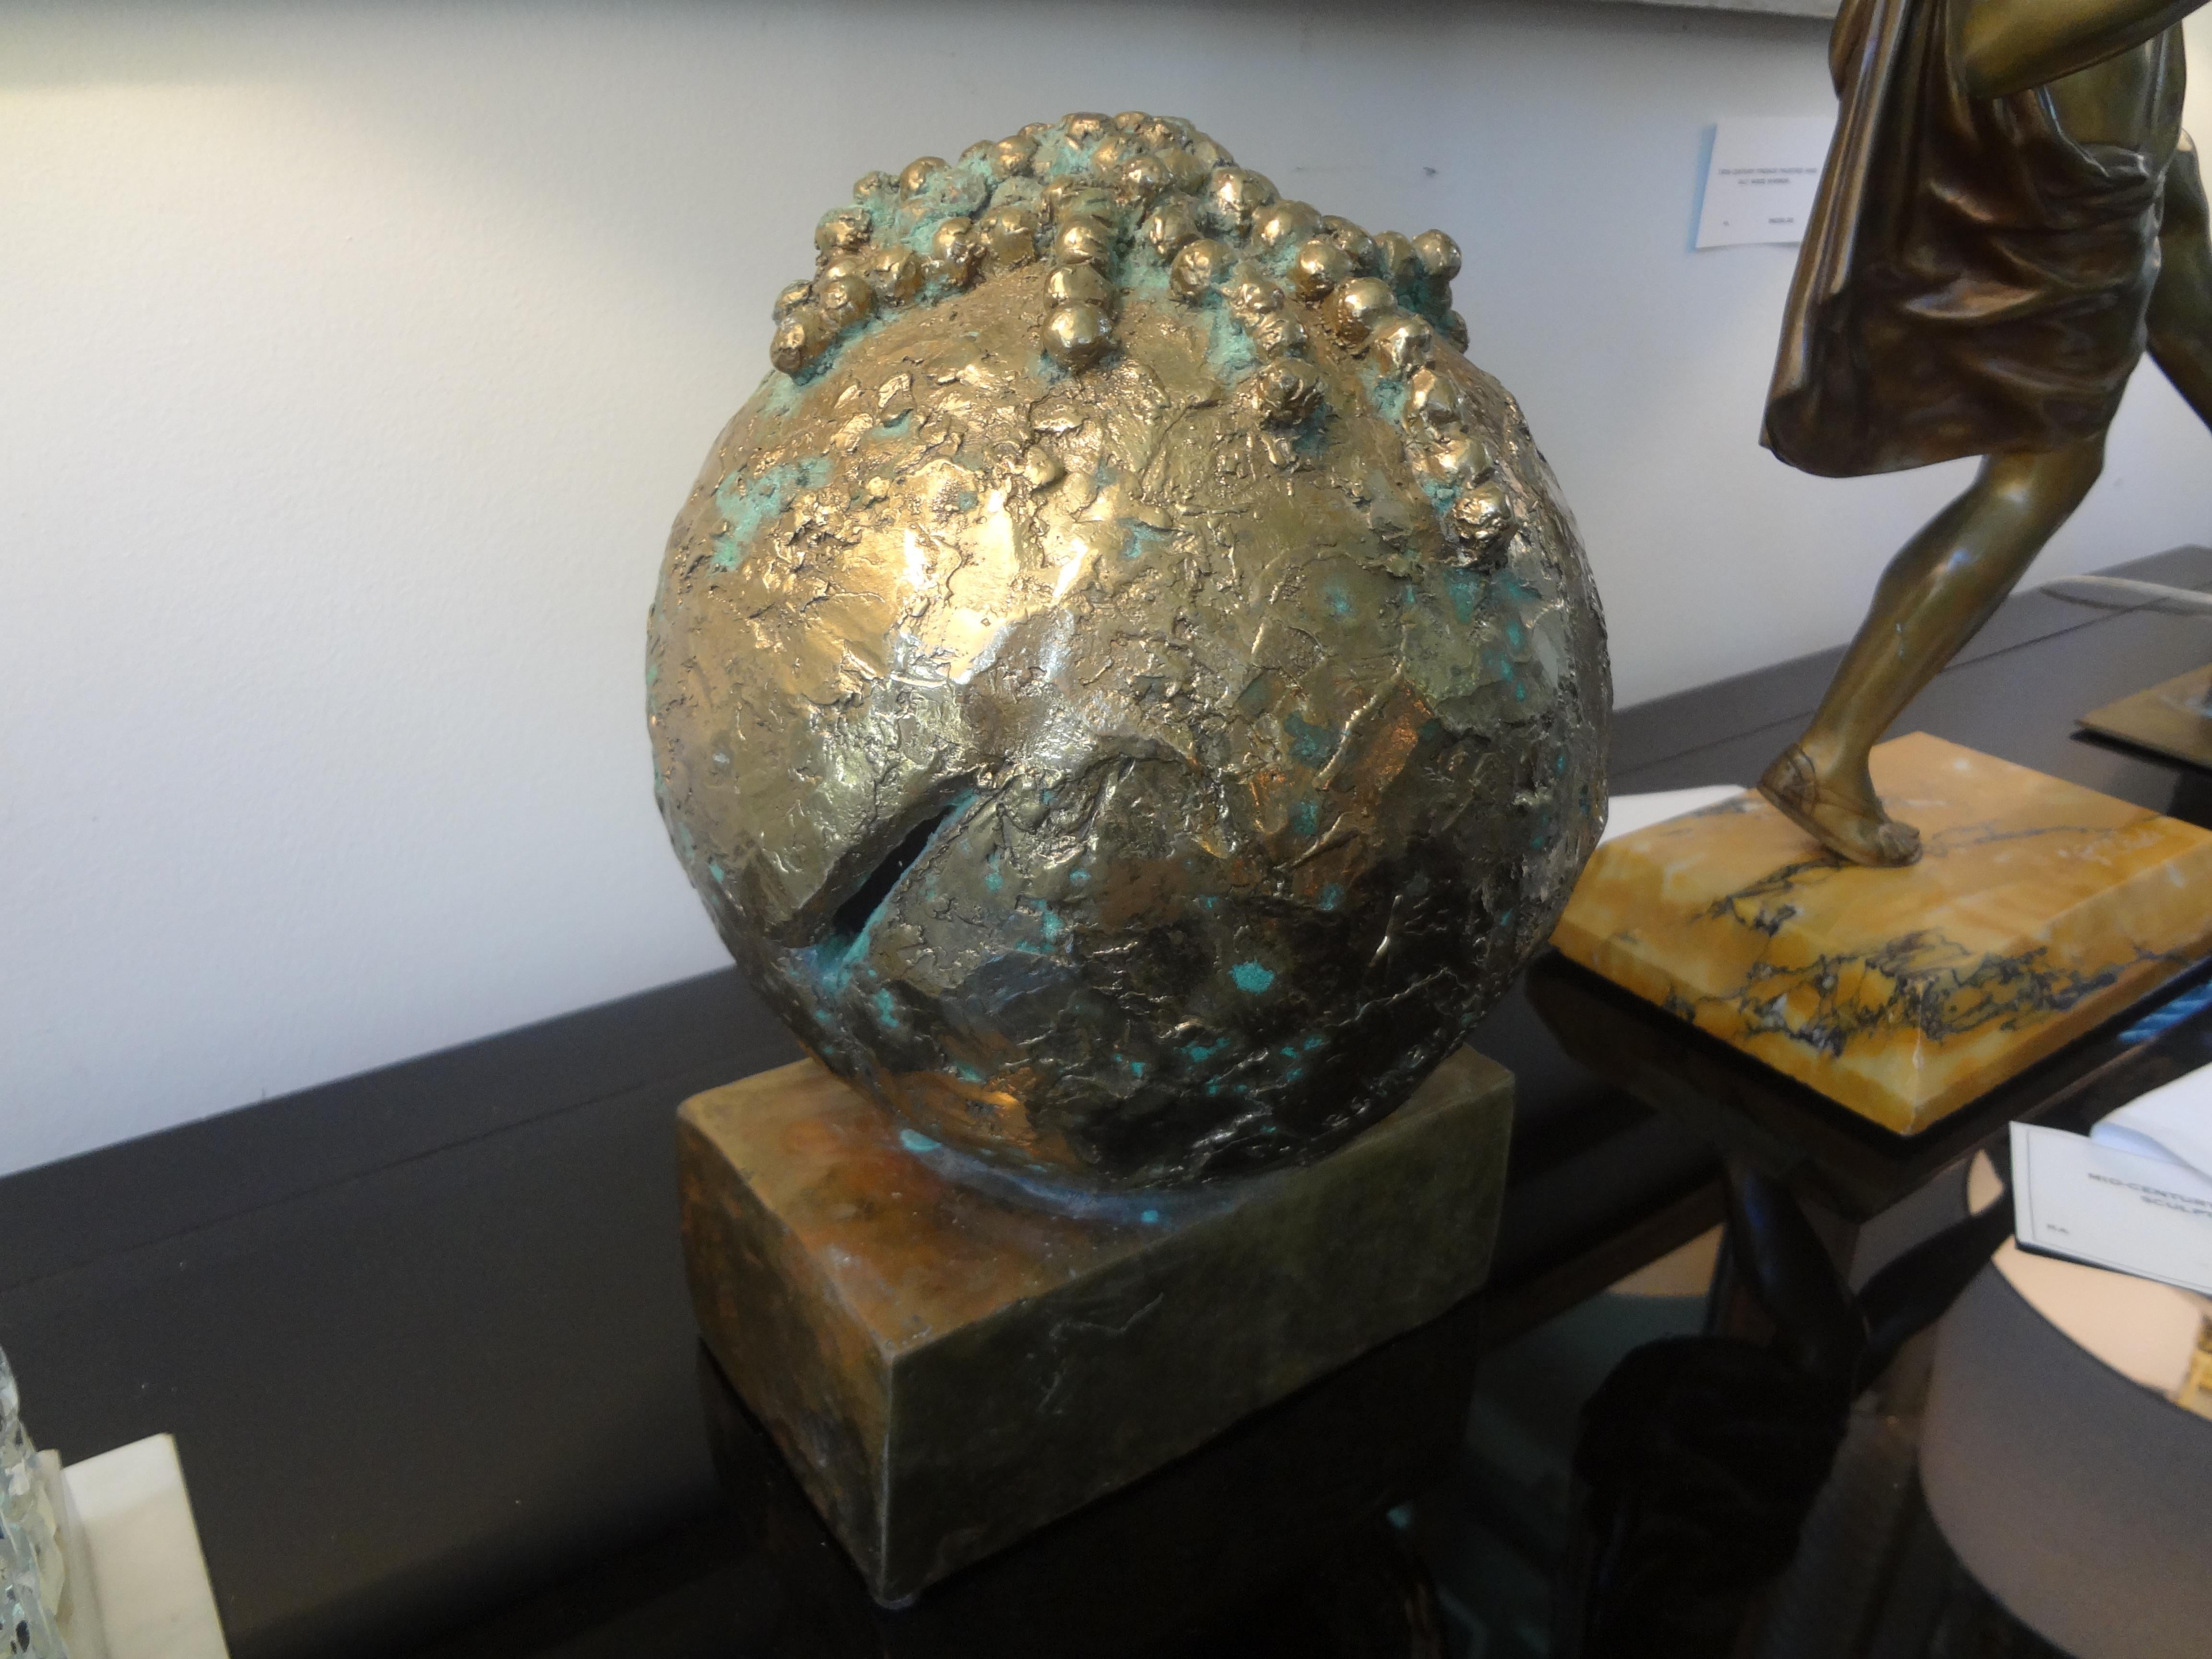 Midcentury abstract bronze sculpture.
Stunning midcentury abstract bronze sculpture. This well cast abstract bronze has great patina and is perfect for a cocktail table, console table or in a bookcase.